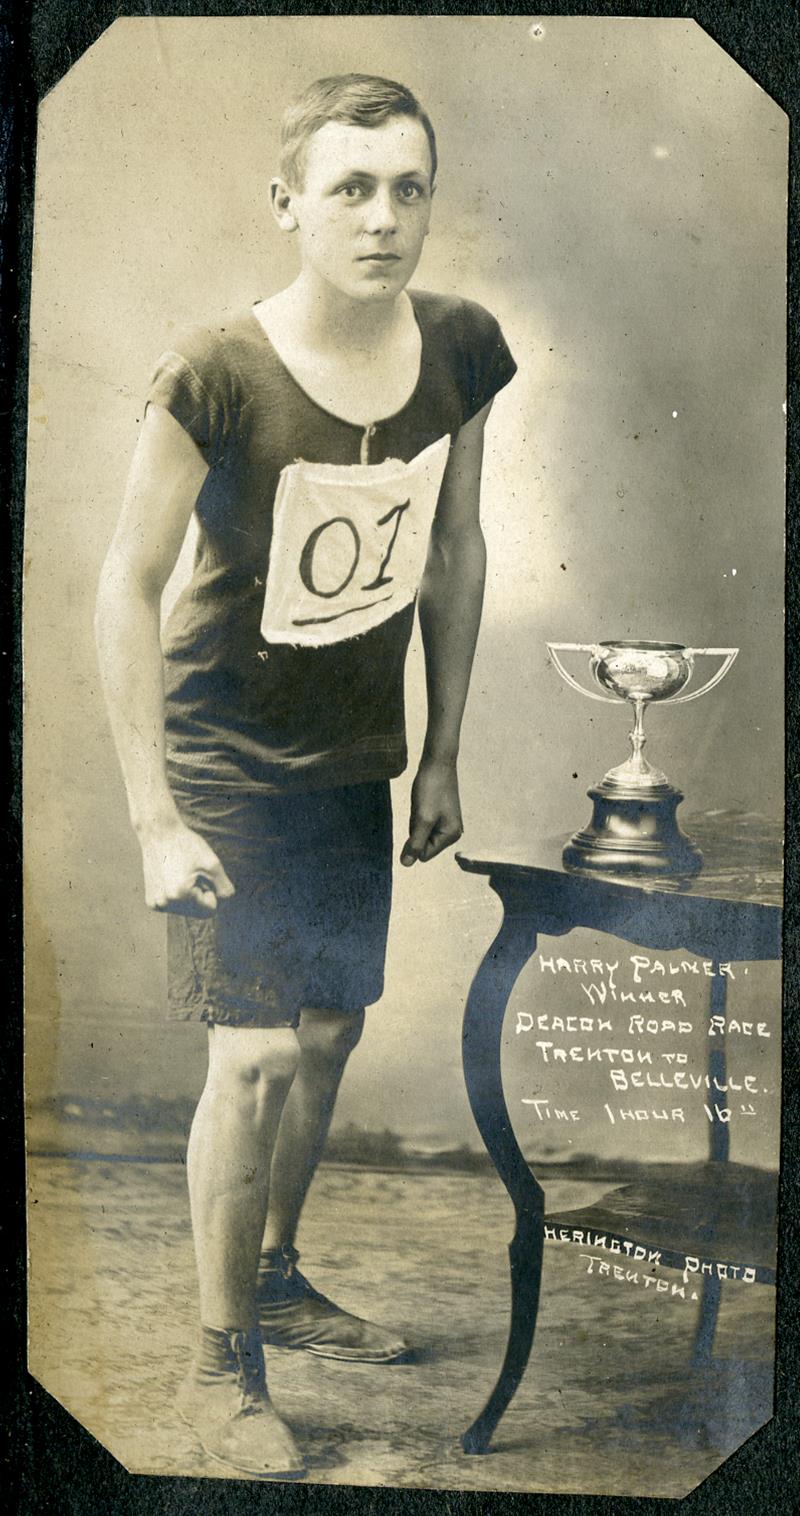 A young man in athletic clothing with a trophy.